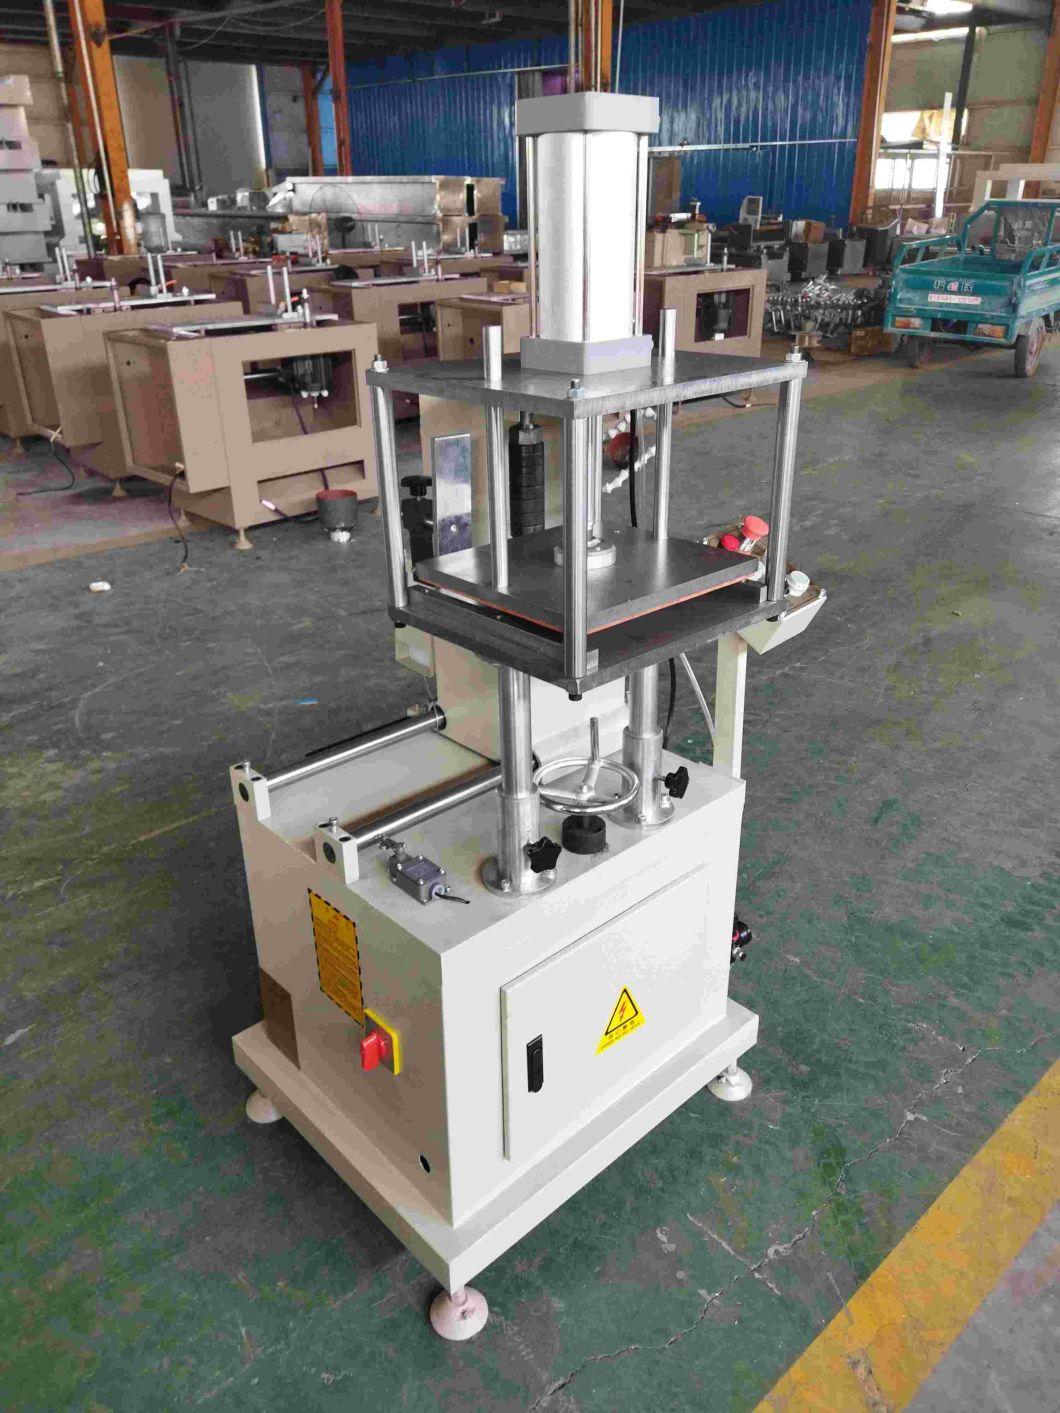 Lxd-200A Endface Multiple Profiles Milling Machine for Rectangular Grooves CNC Machine for Doors and Windows Making CNC Cutter